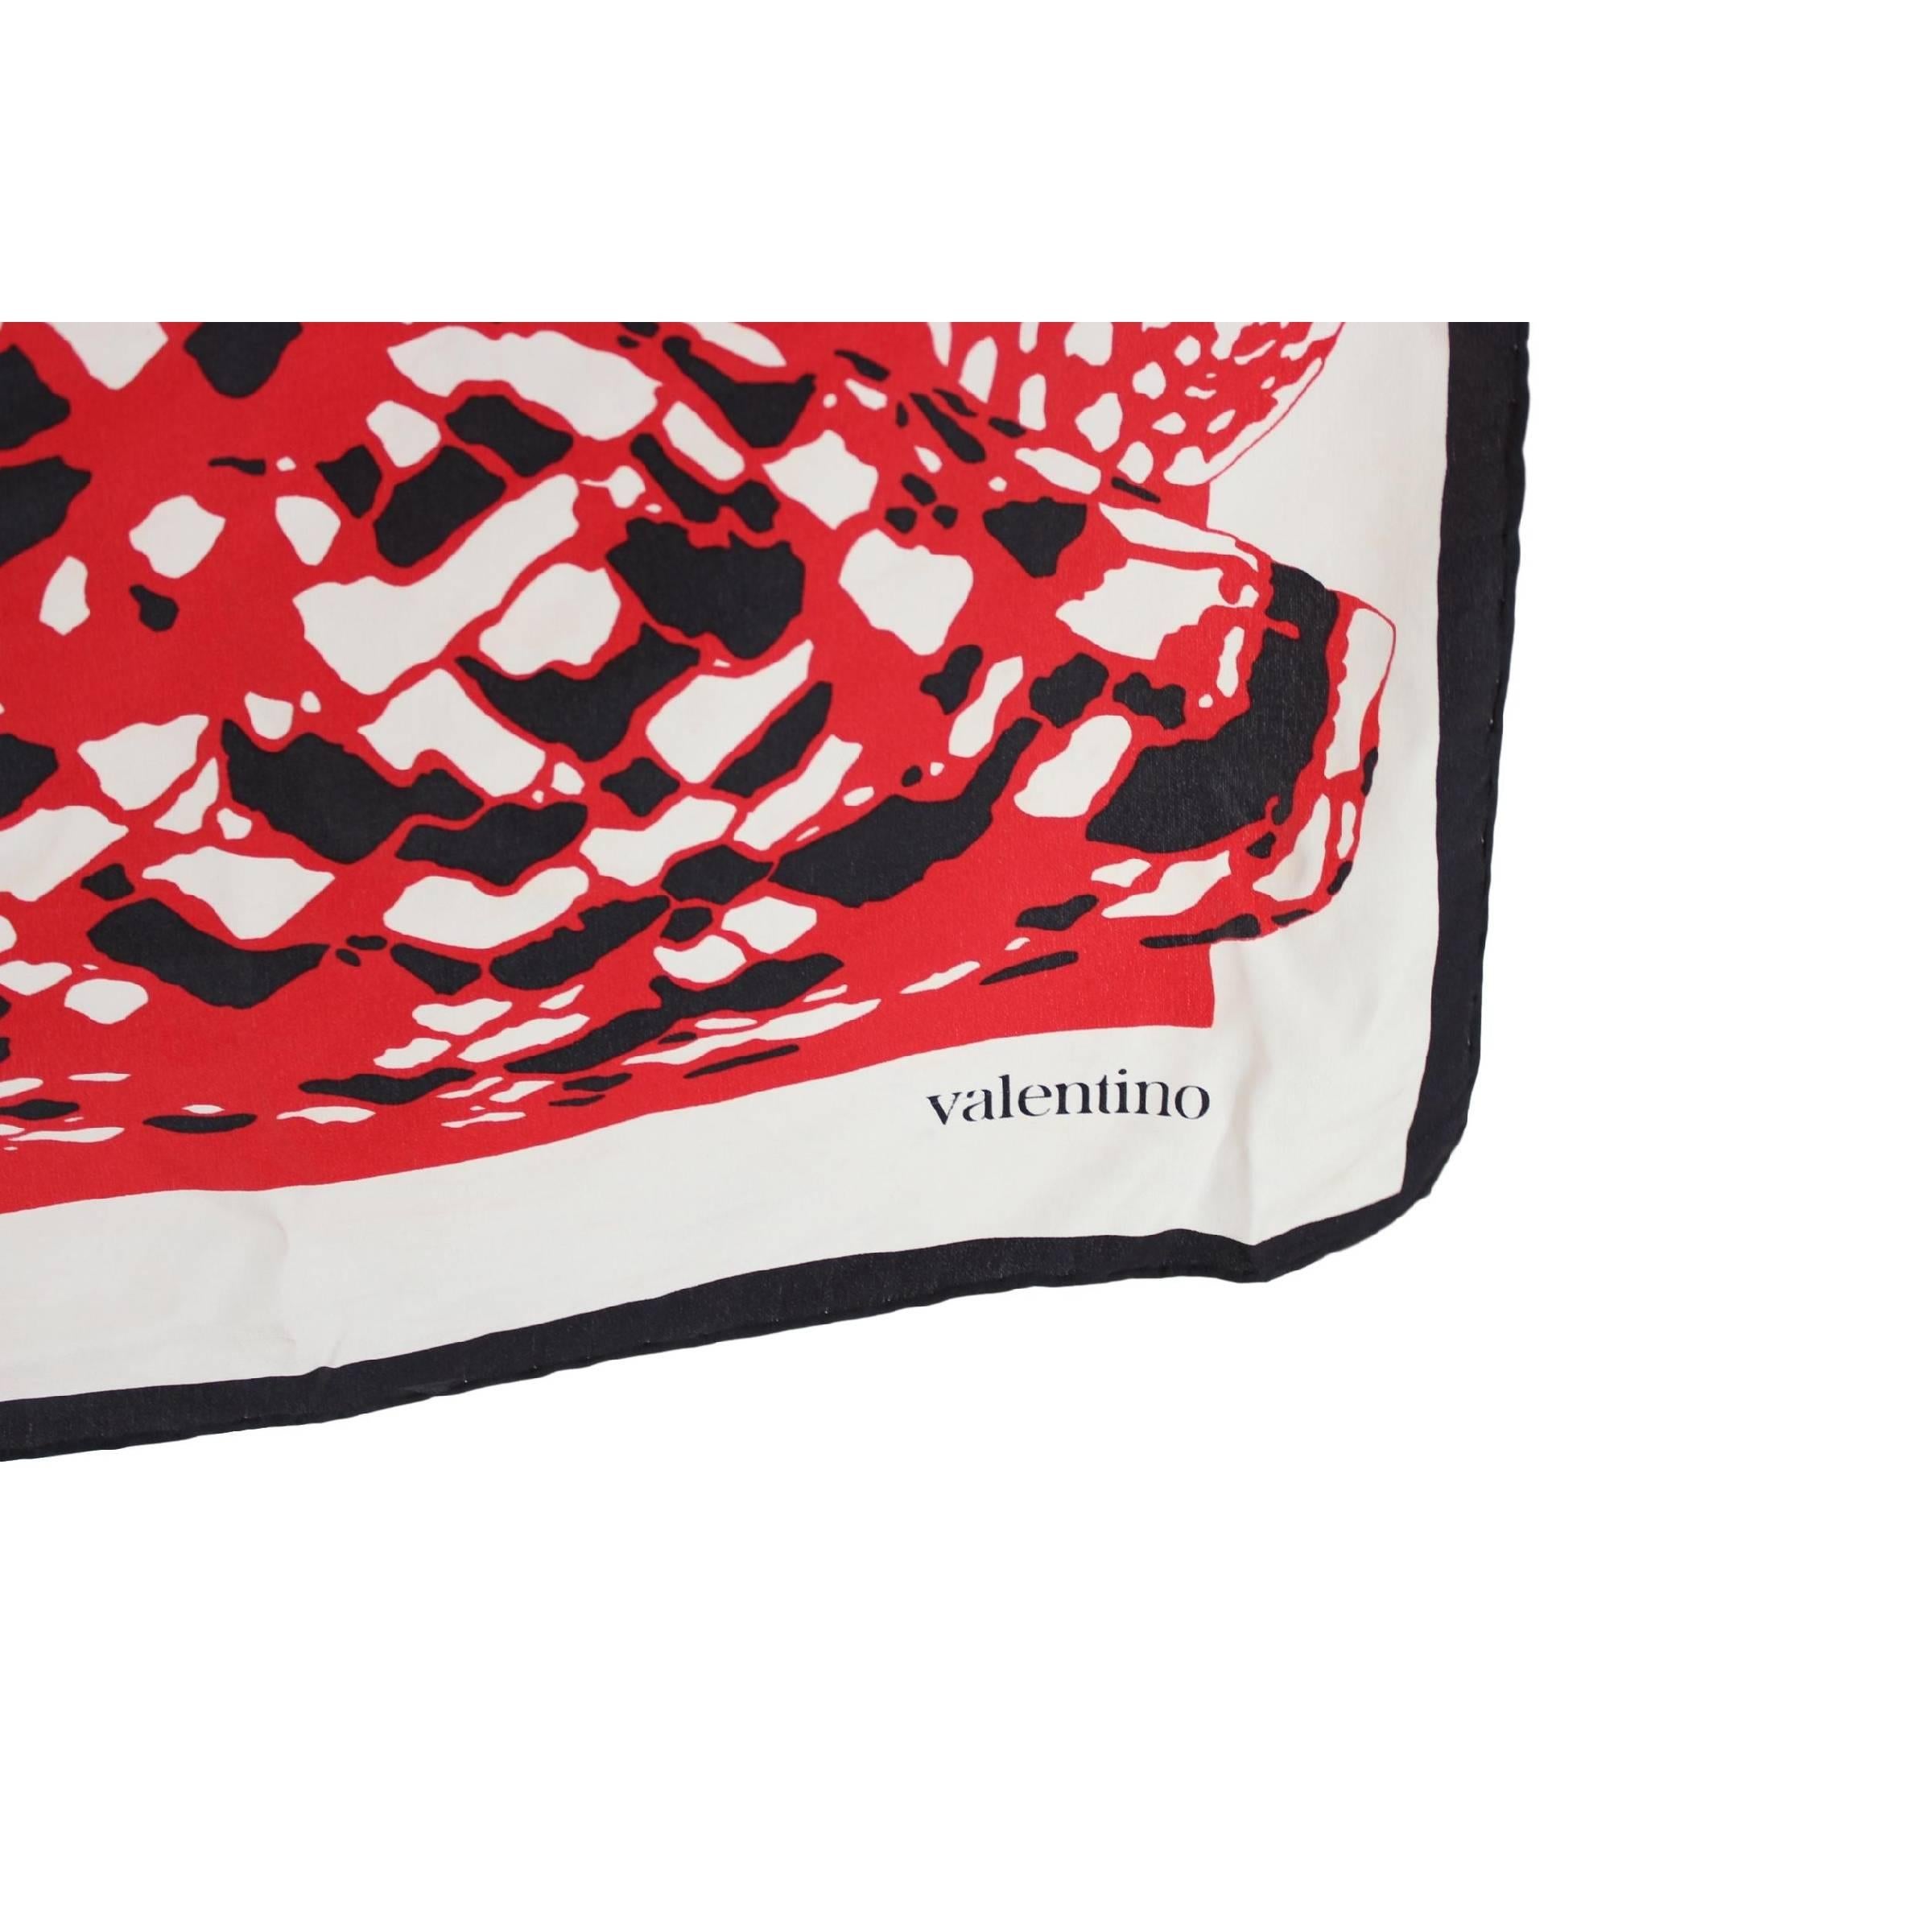 Valentino silk scarf. Red and black geometric designs on a white background. Made in Italy. Excellent vintage conditions.

Measurements: 84 x 84 cm

Color: Multicolor
Composition: 100% silk
Conditions: Excellent vintage condition.